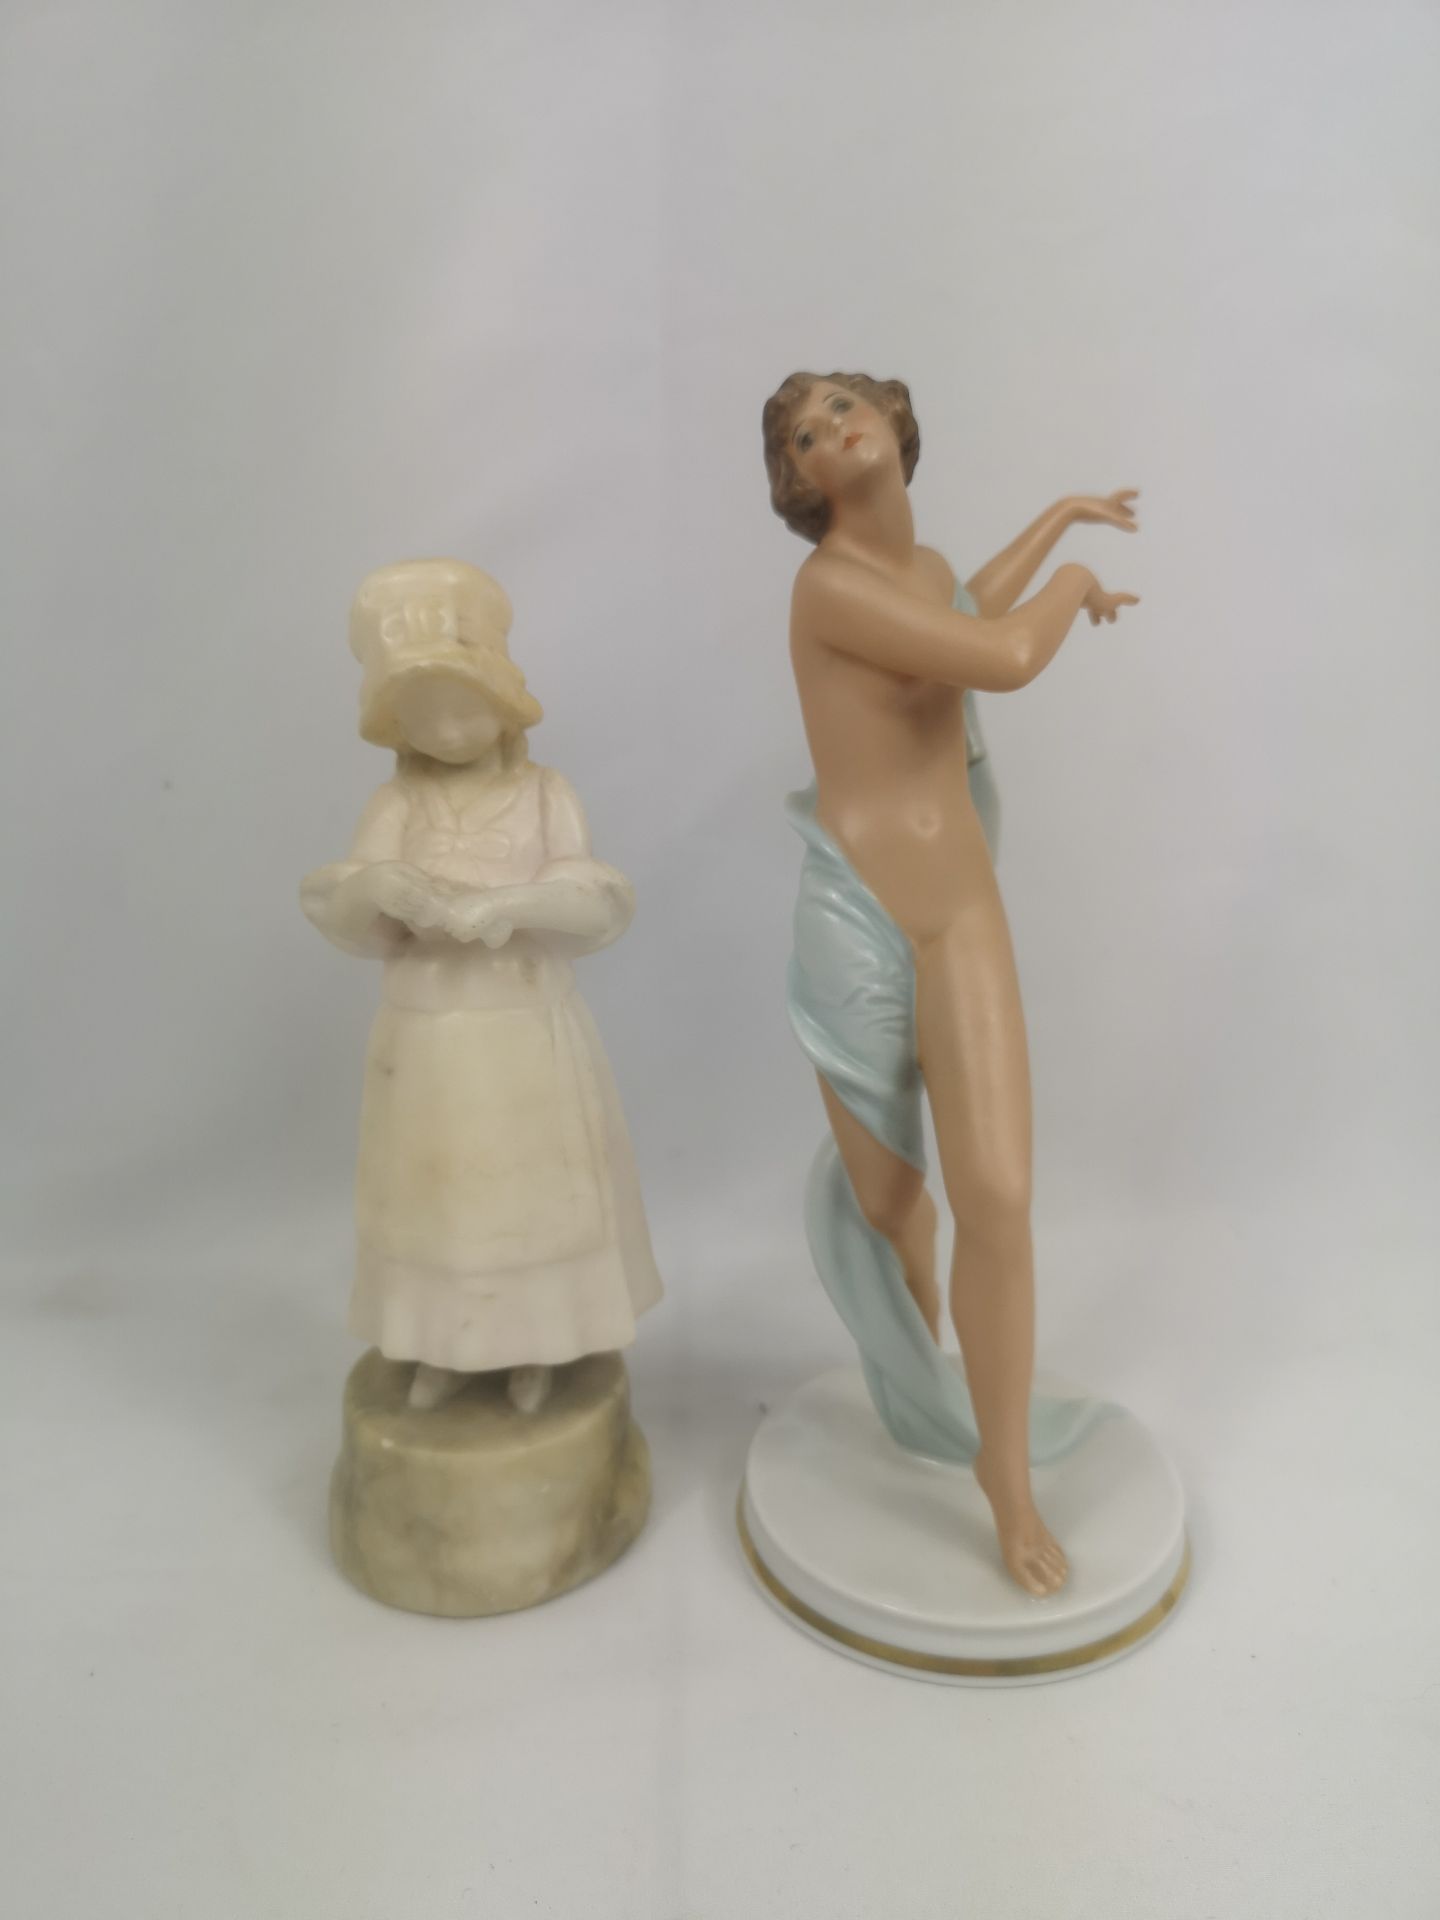 Art deco style Rosenthal figurine together with a Goldscheider figurine